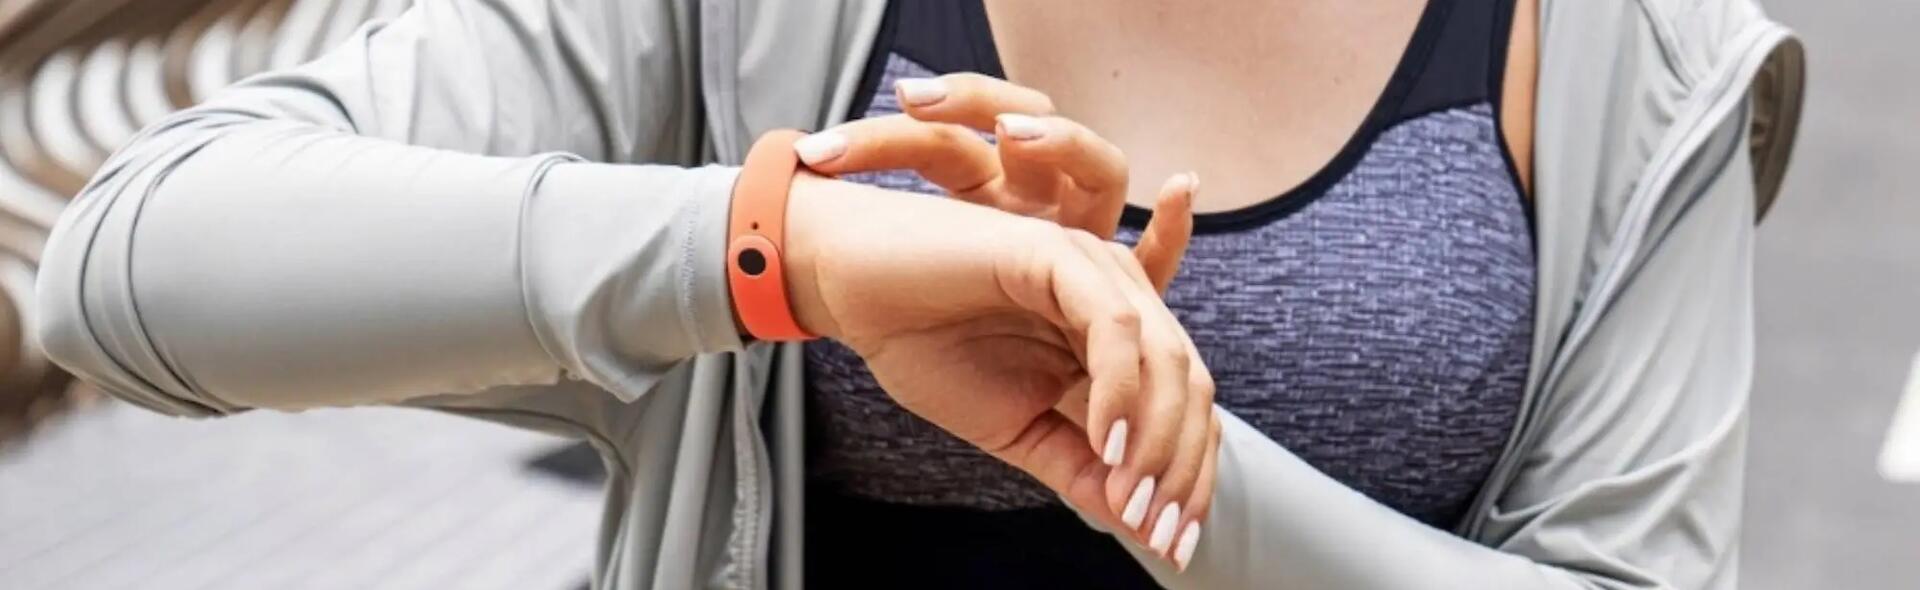 PEDOMETERS & CONNECTED BRACELETS